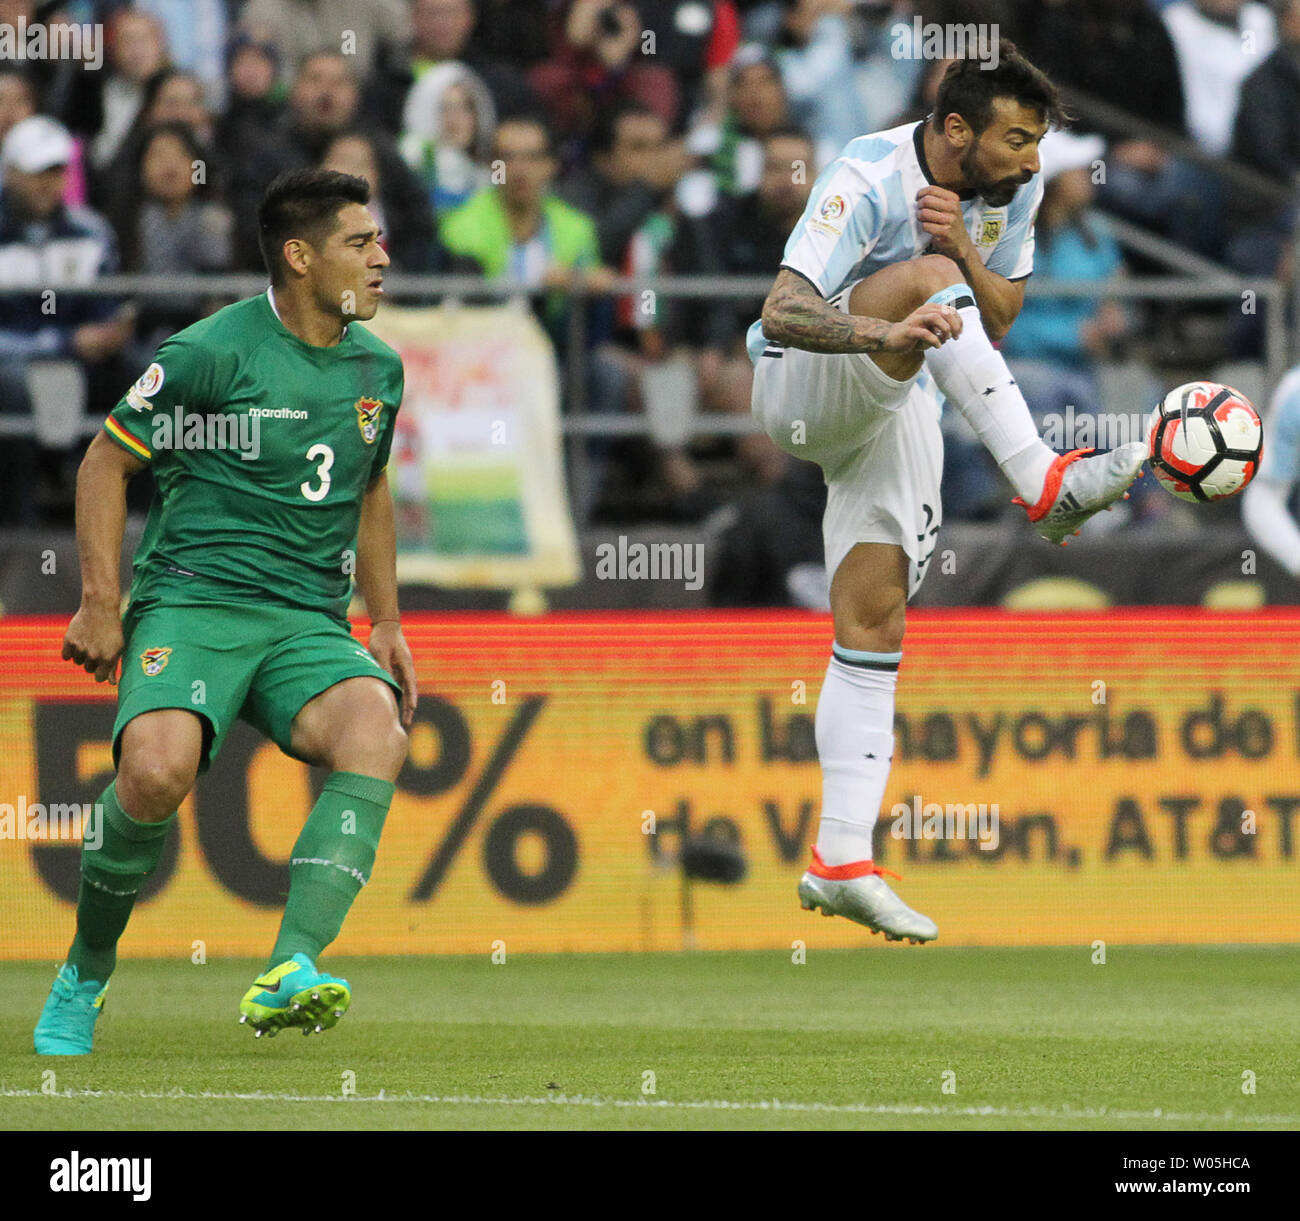 Argentina's Ezequiet Lavezzi (22) boots the ball away from Bolivia's Facundo Roncaglia (3) in a 2016 Copa America Centenario soccer match at CenturyLink Field in Seattle, Washington on June 14, 2016.  Lavezzi scored a first half gaol a in Argentina's 3-0 win over Bolivia.   Photo by Jim Bryant/ UPI Stock Photo